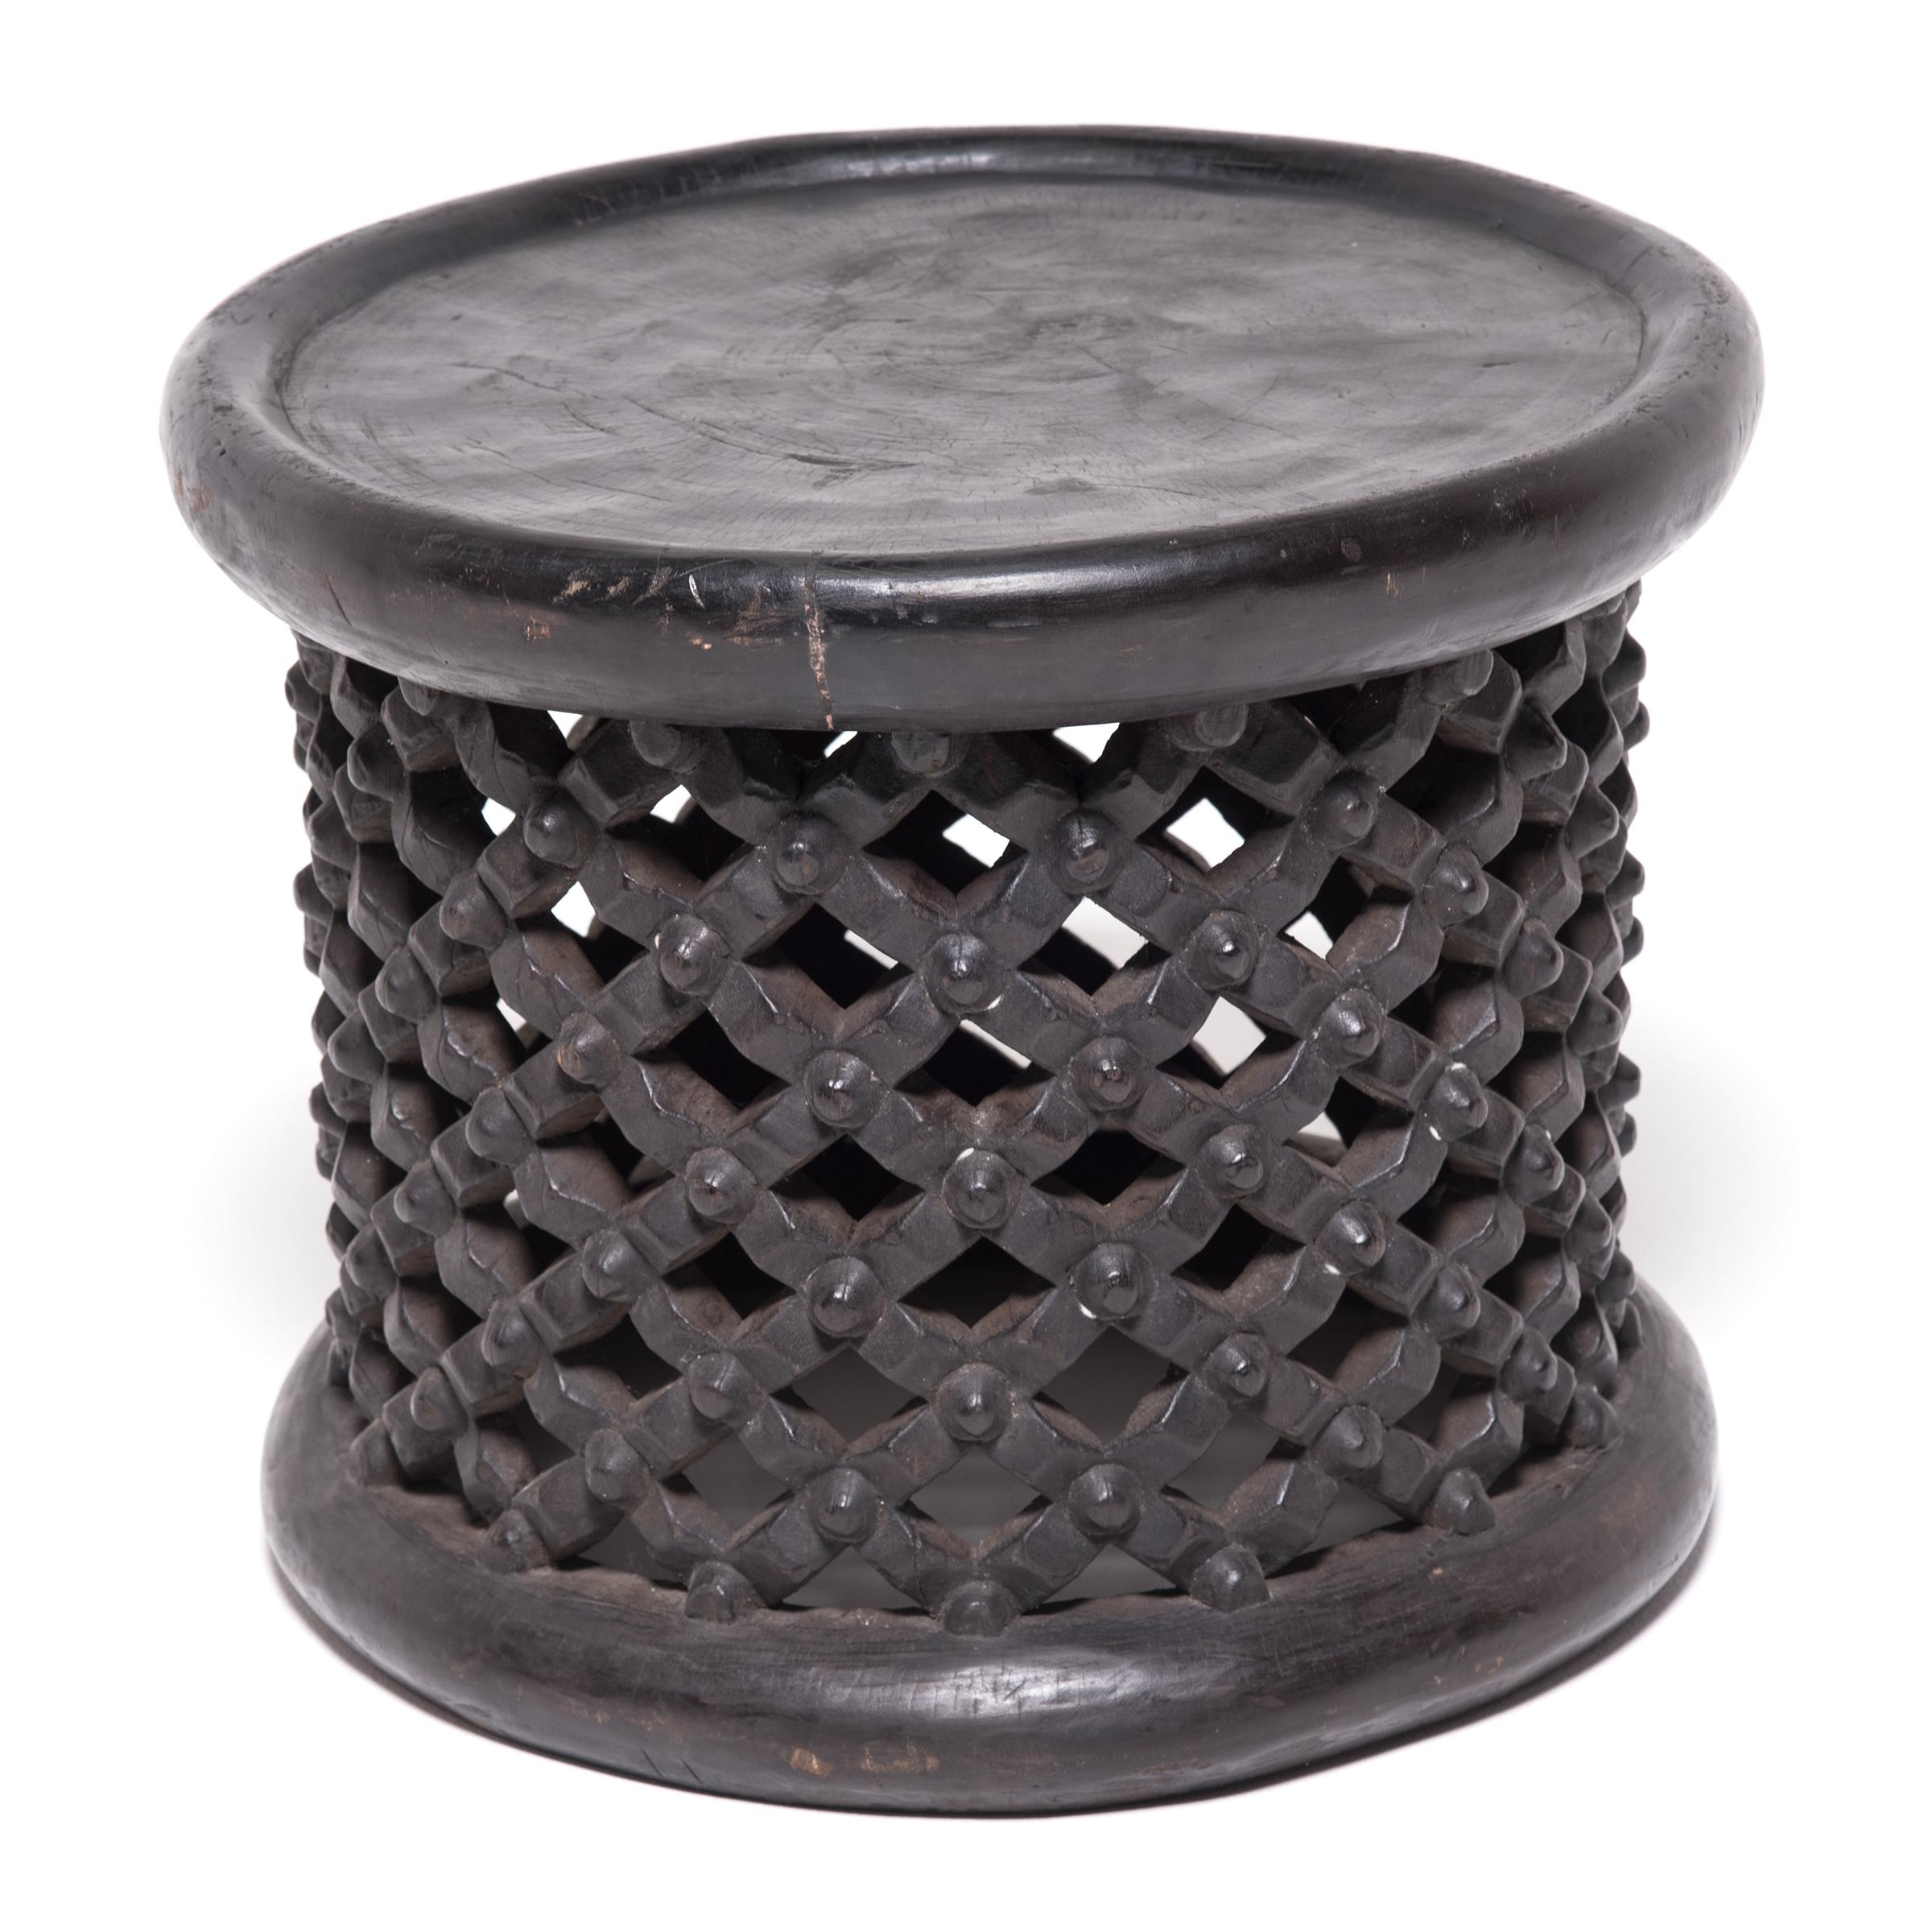 Carved from a single tree trunk, Bamileke lattice stools were used in Cameroon as symbolic seats in public ceremonies. The lattice webbing represents both the life cycle and the divine wisdom of the earth spider. A stool with broken lattice was